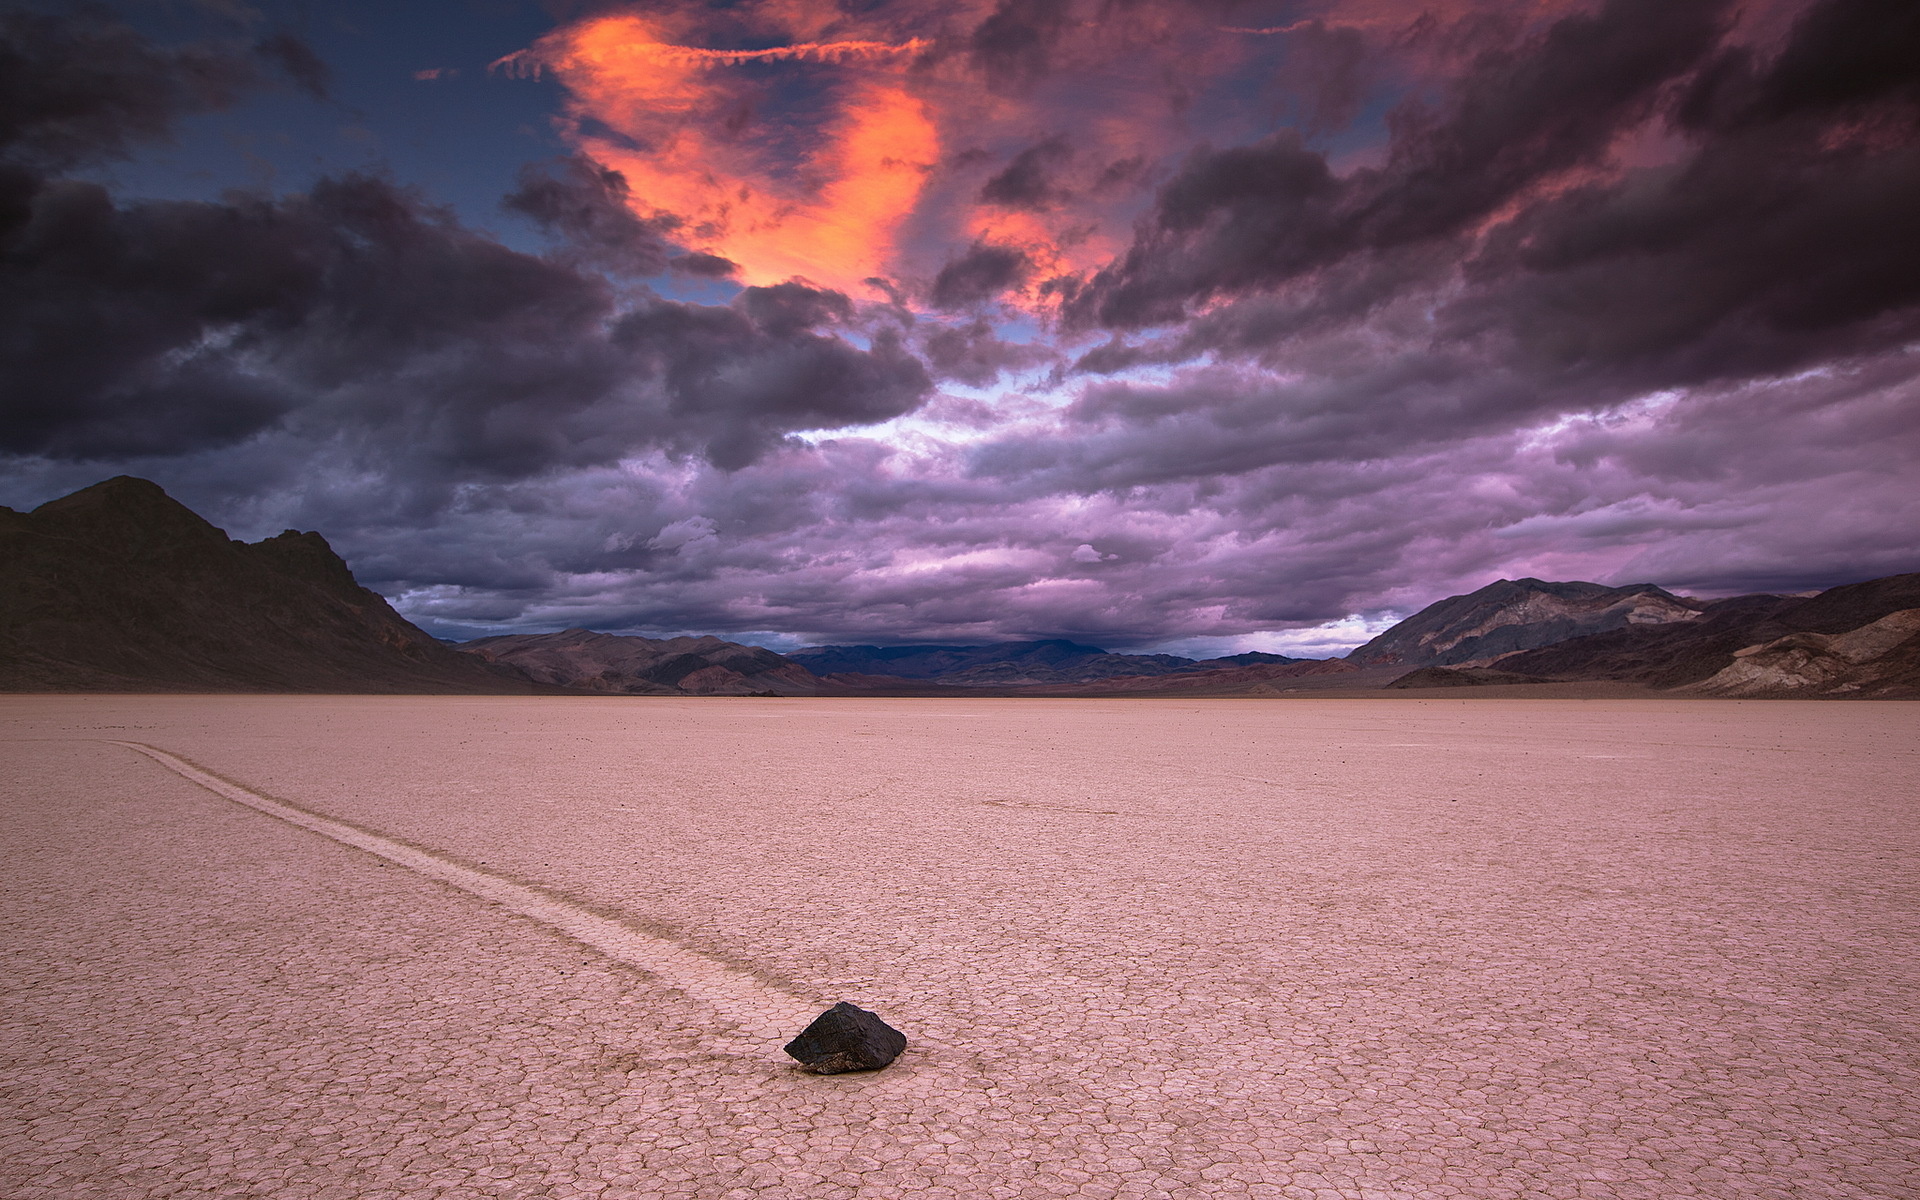 nevada, Desert, Sunset, Landscapes, Travel, Path, Trail, Crack, Mountains, Sky, Clouds Wallpaper